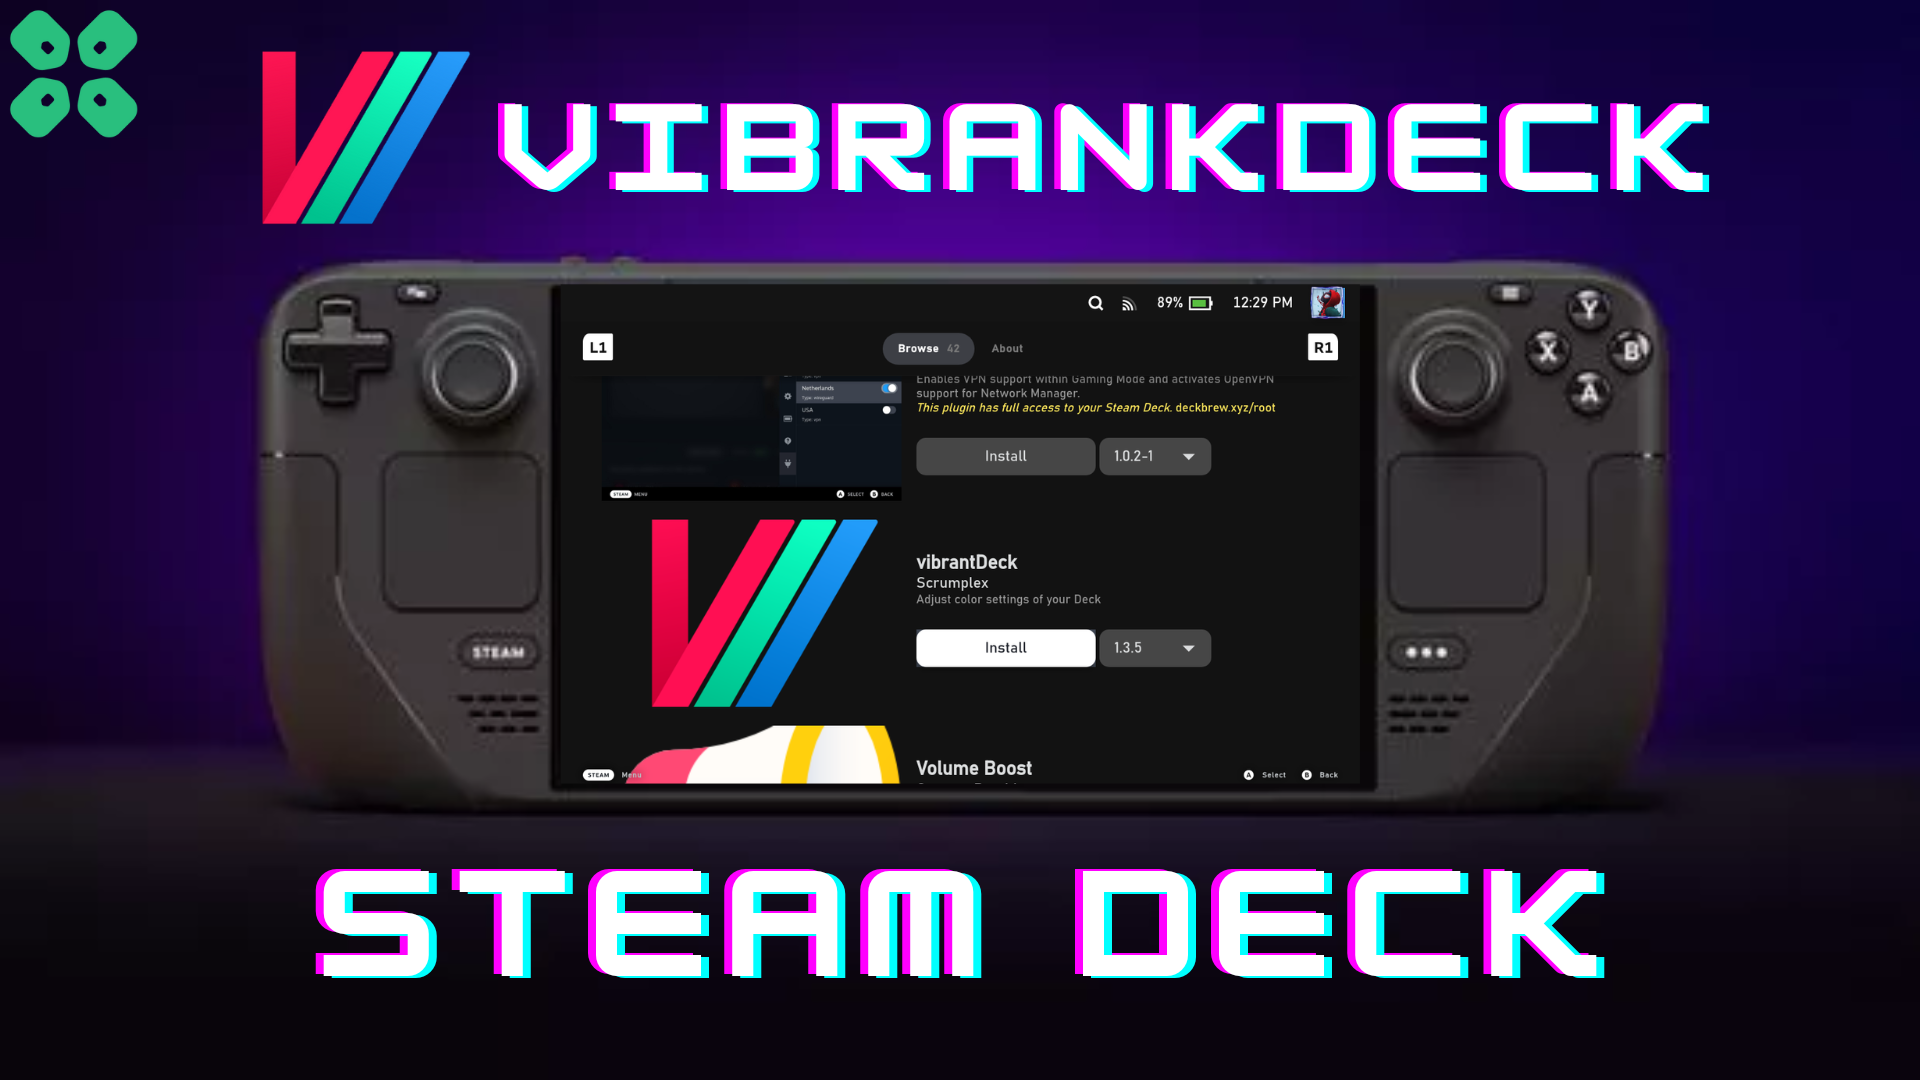 How to Install VibrantDeck on Steam Deck